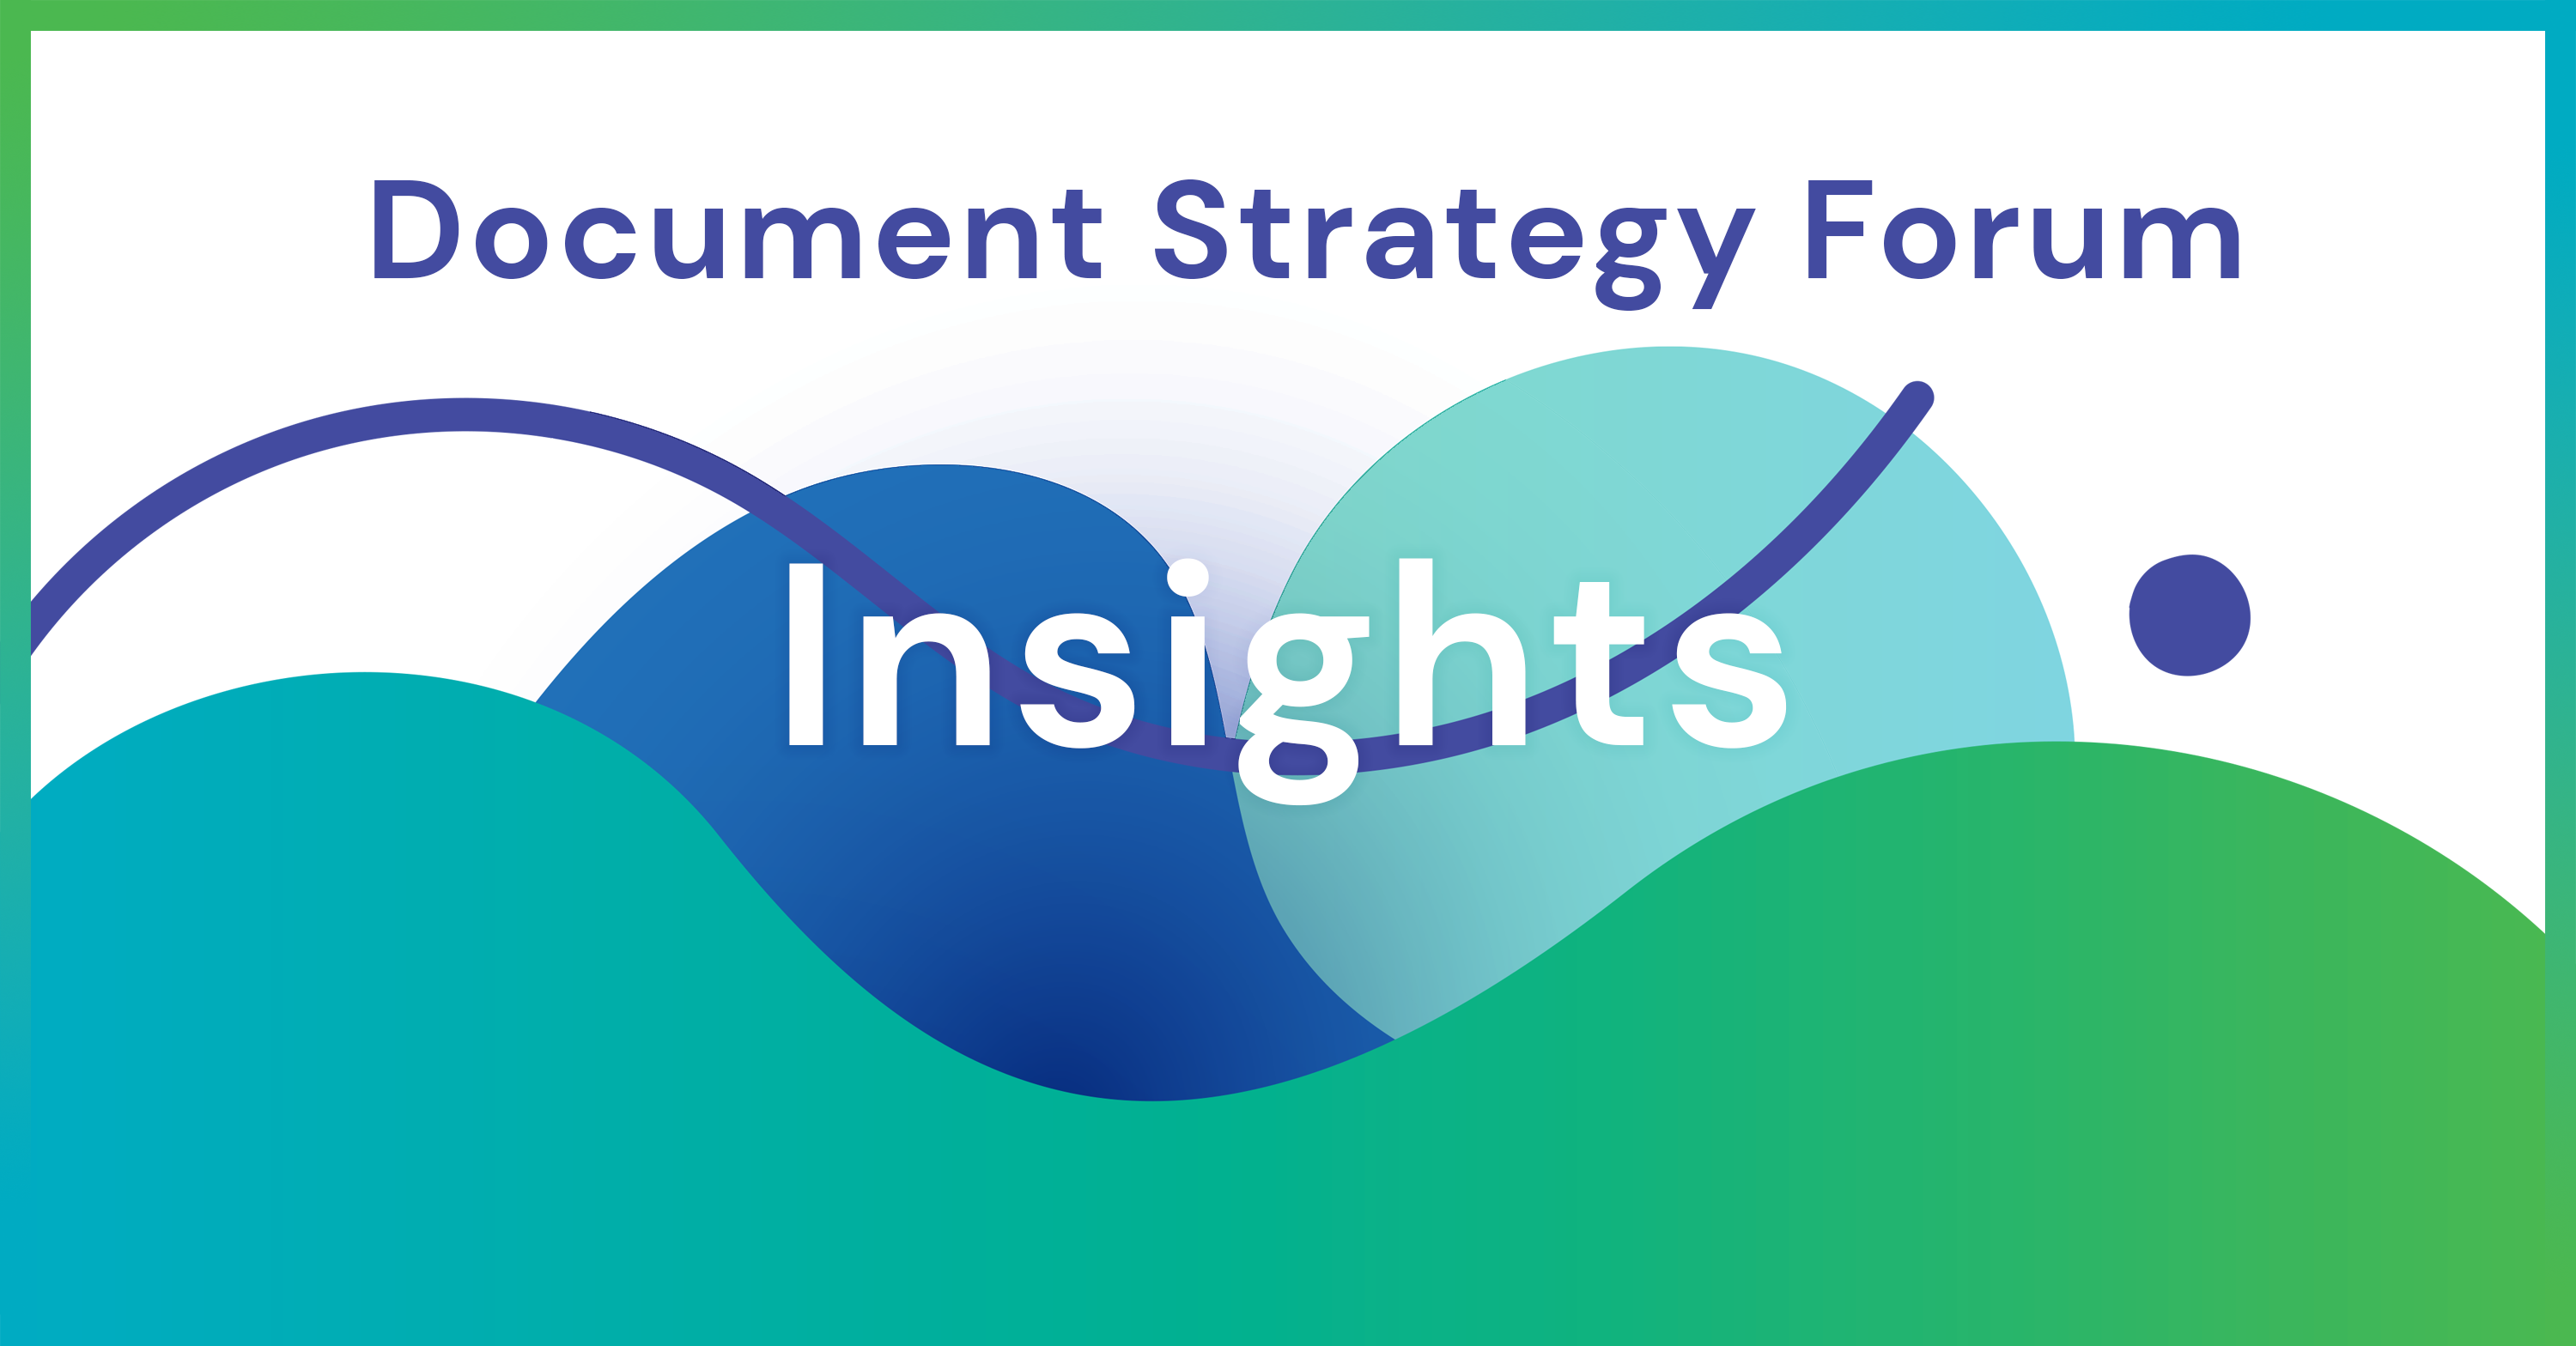 Document Strategy Forum Insights on a background of blue and green blobs with a dark blue wavy line